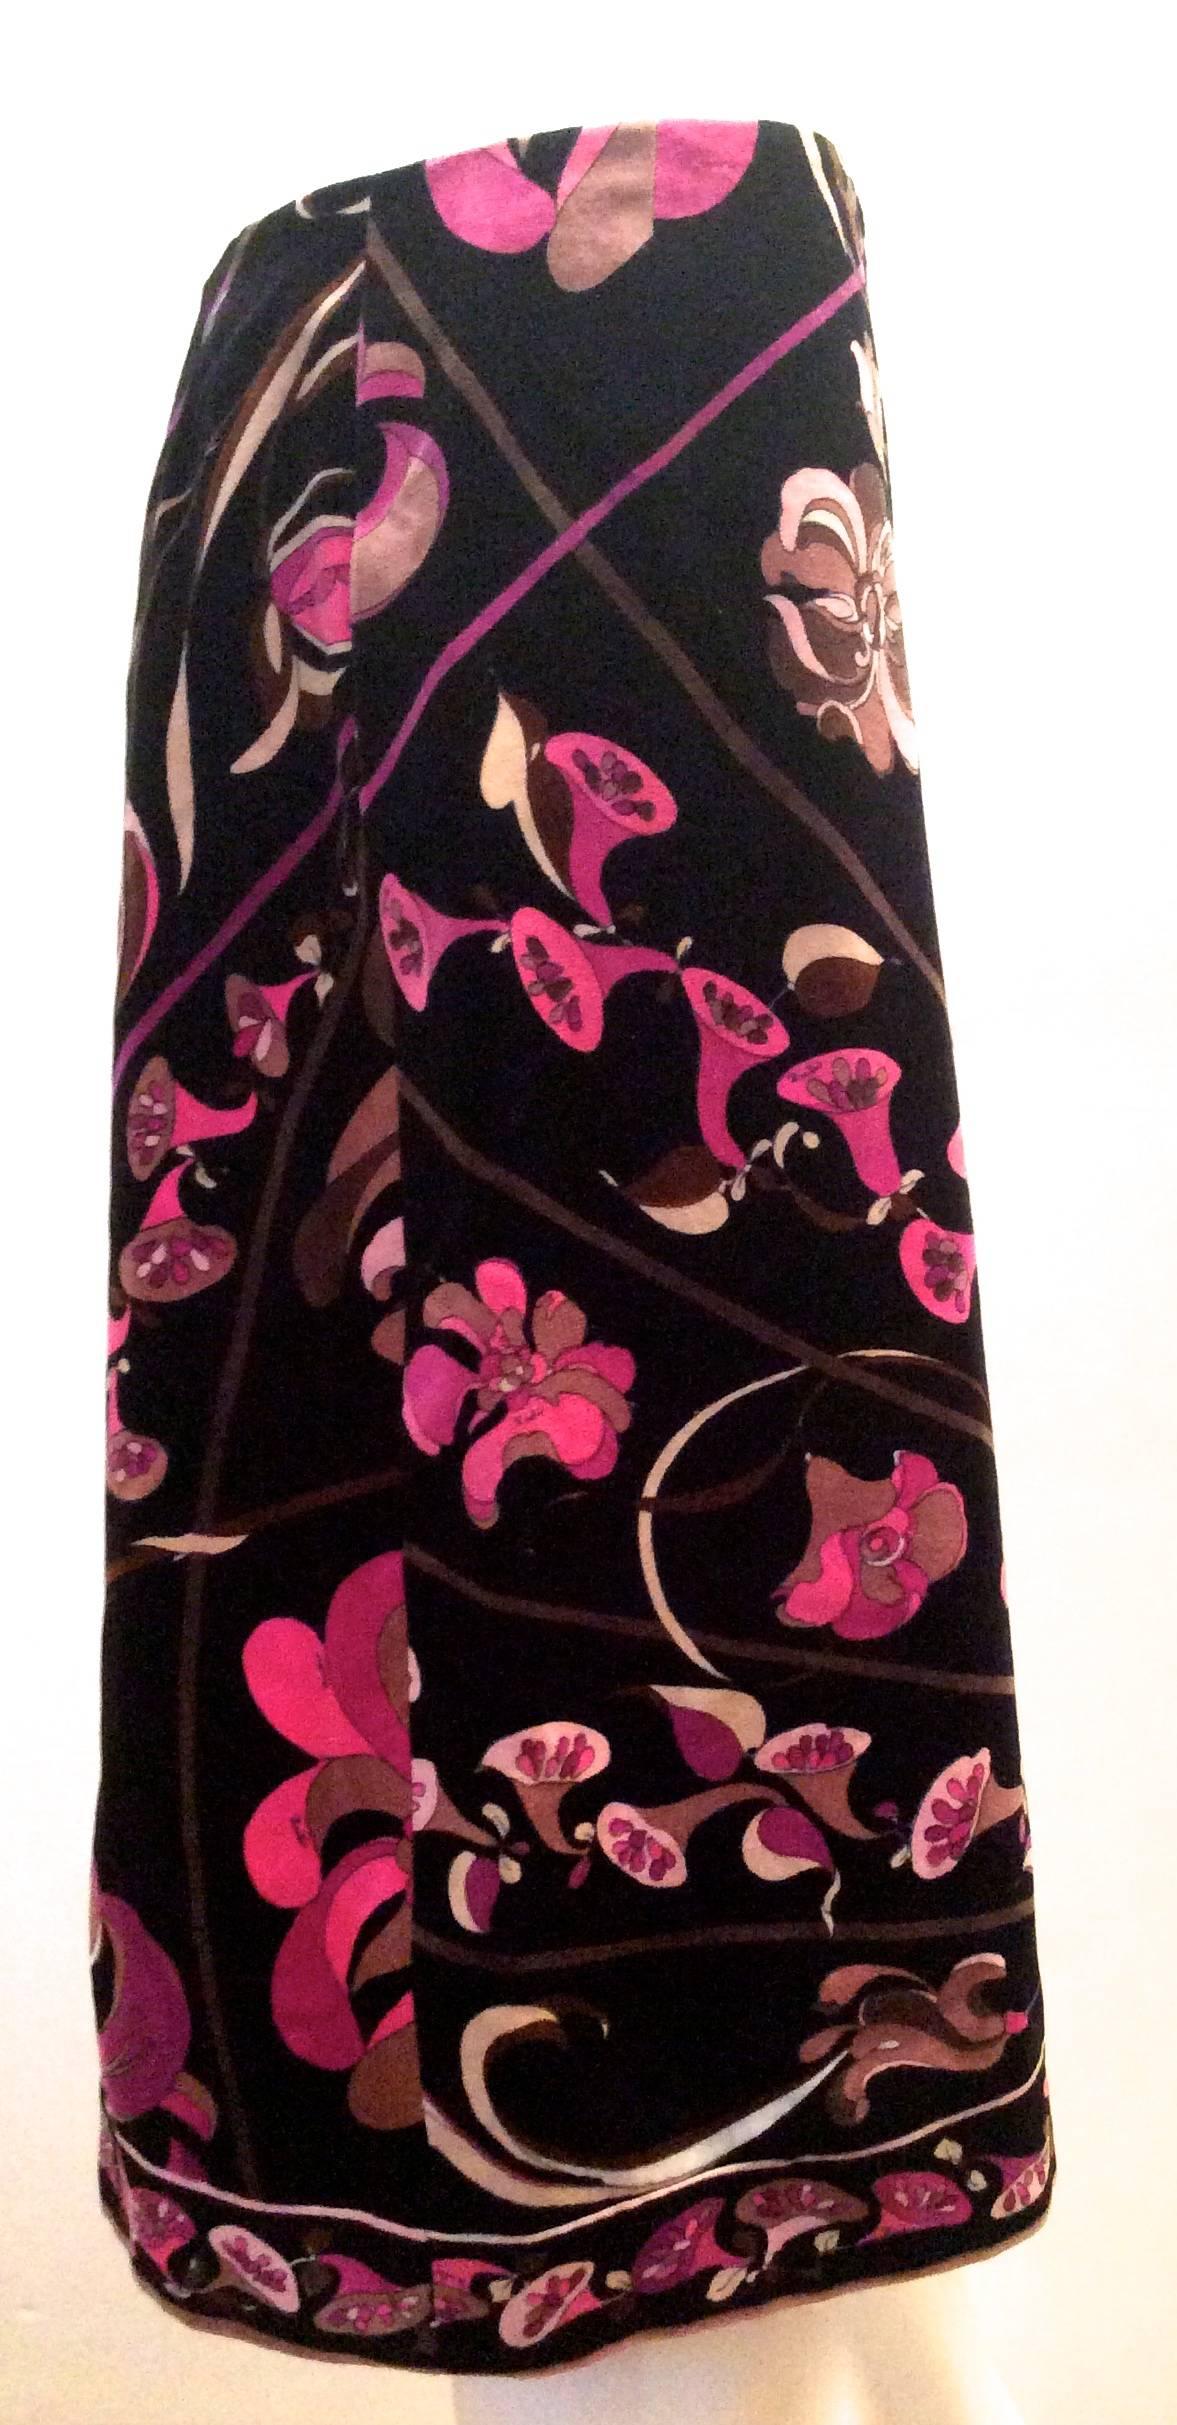 Presented here is a beautiful Emilio Pucci black velvet skirt. It has a vibrant pattern of various shades of pink from fuschia to hot pink to light pink flowers with trim and floral highlights in various shades of dark brown, beige and taupe. There